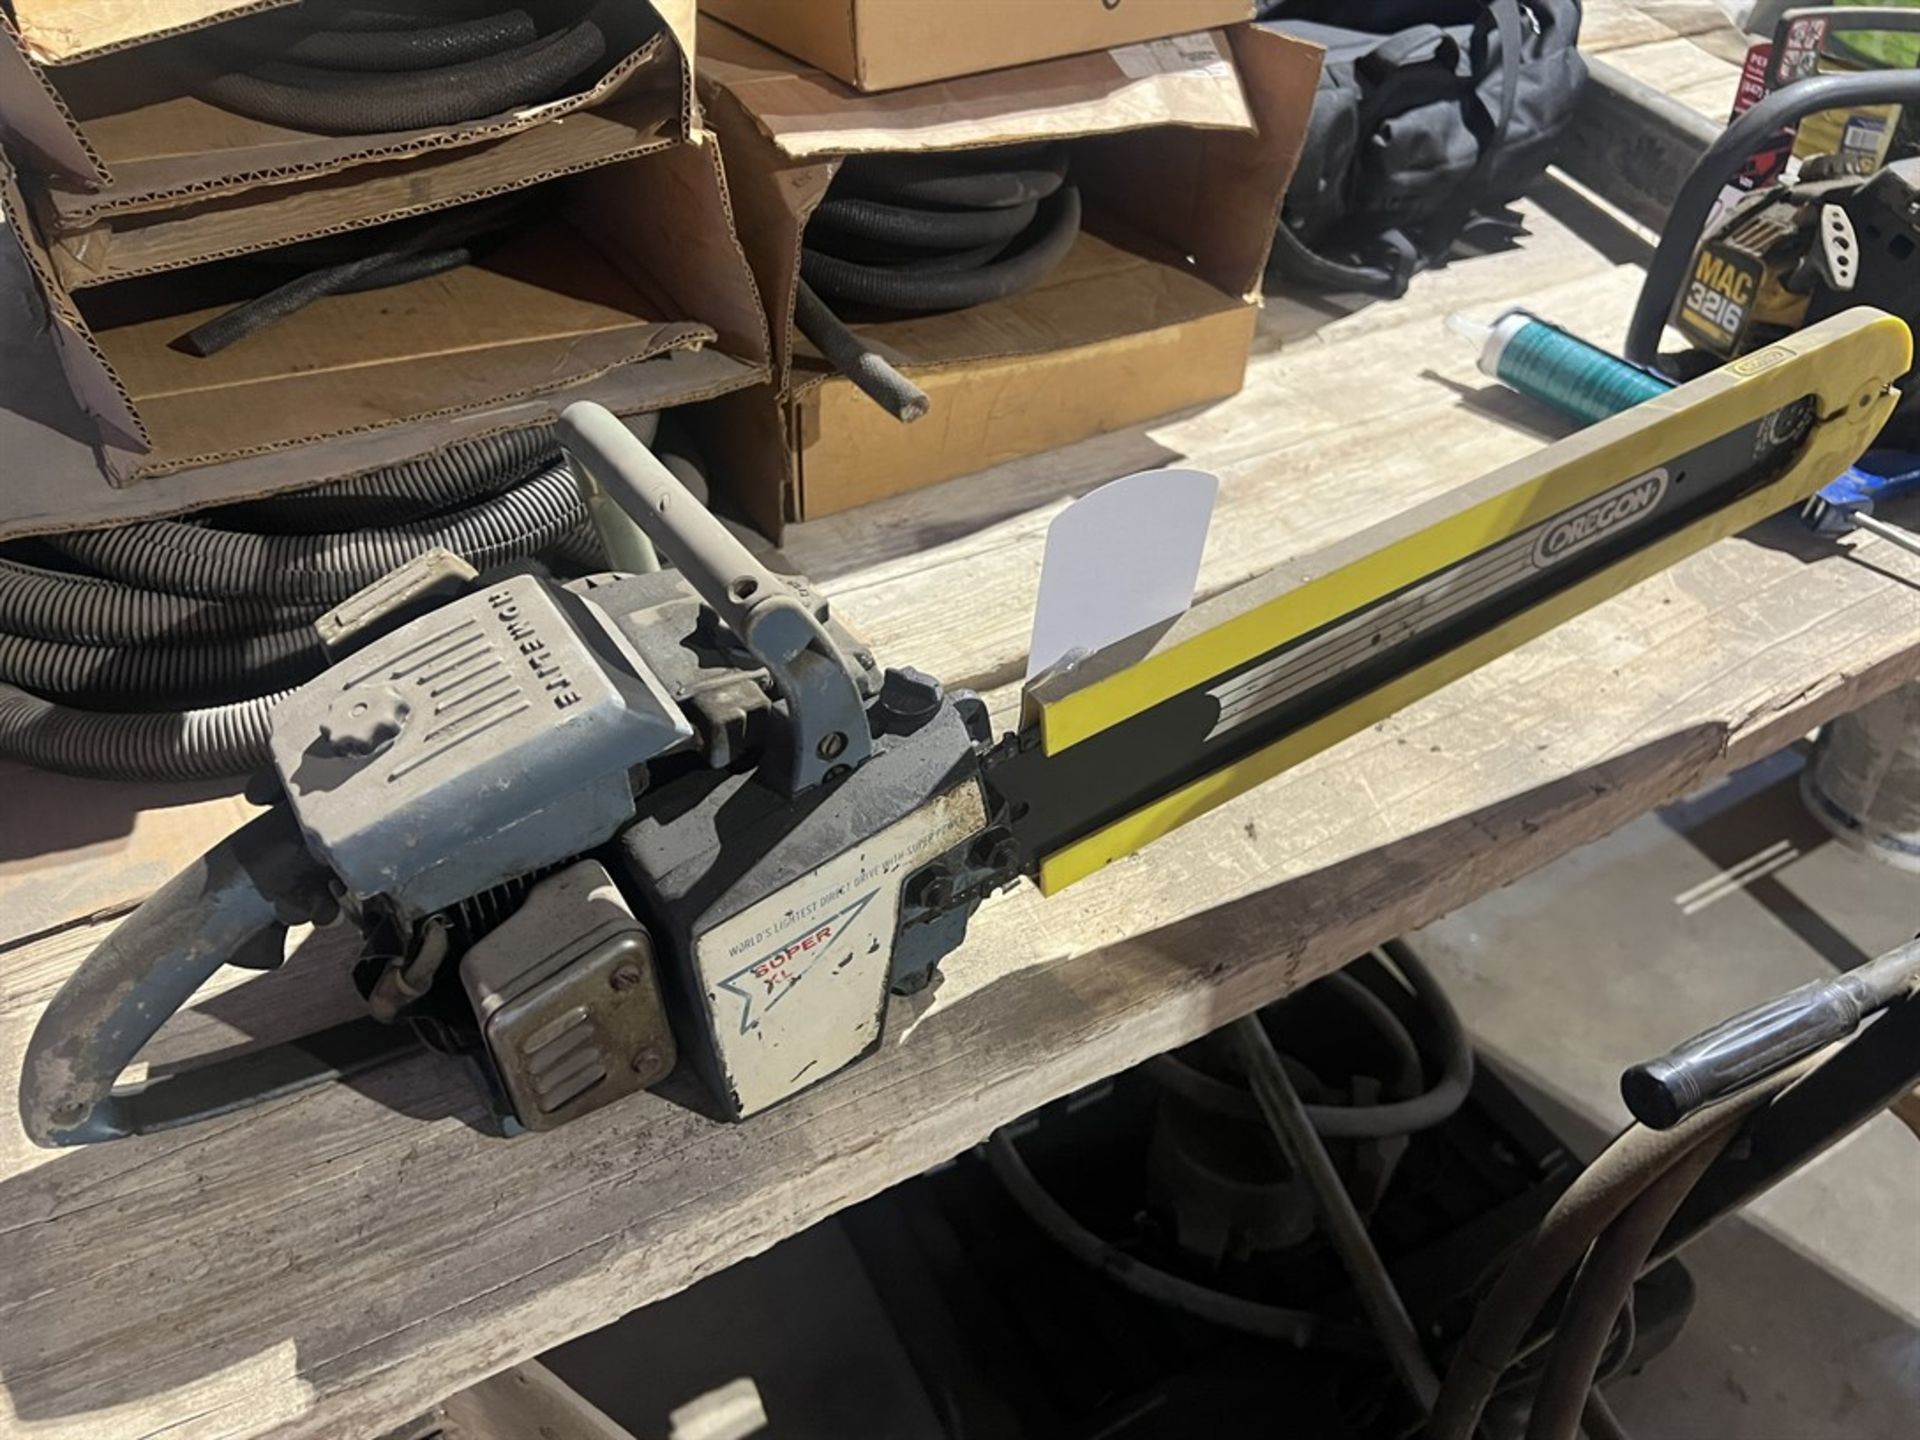 HOMELITE Super XL Chainsaw, (Location 1020 61st Drive, Union Grove, WI 23182) - Image 4 of 4